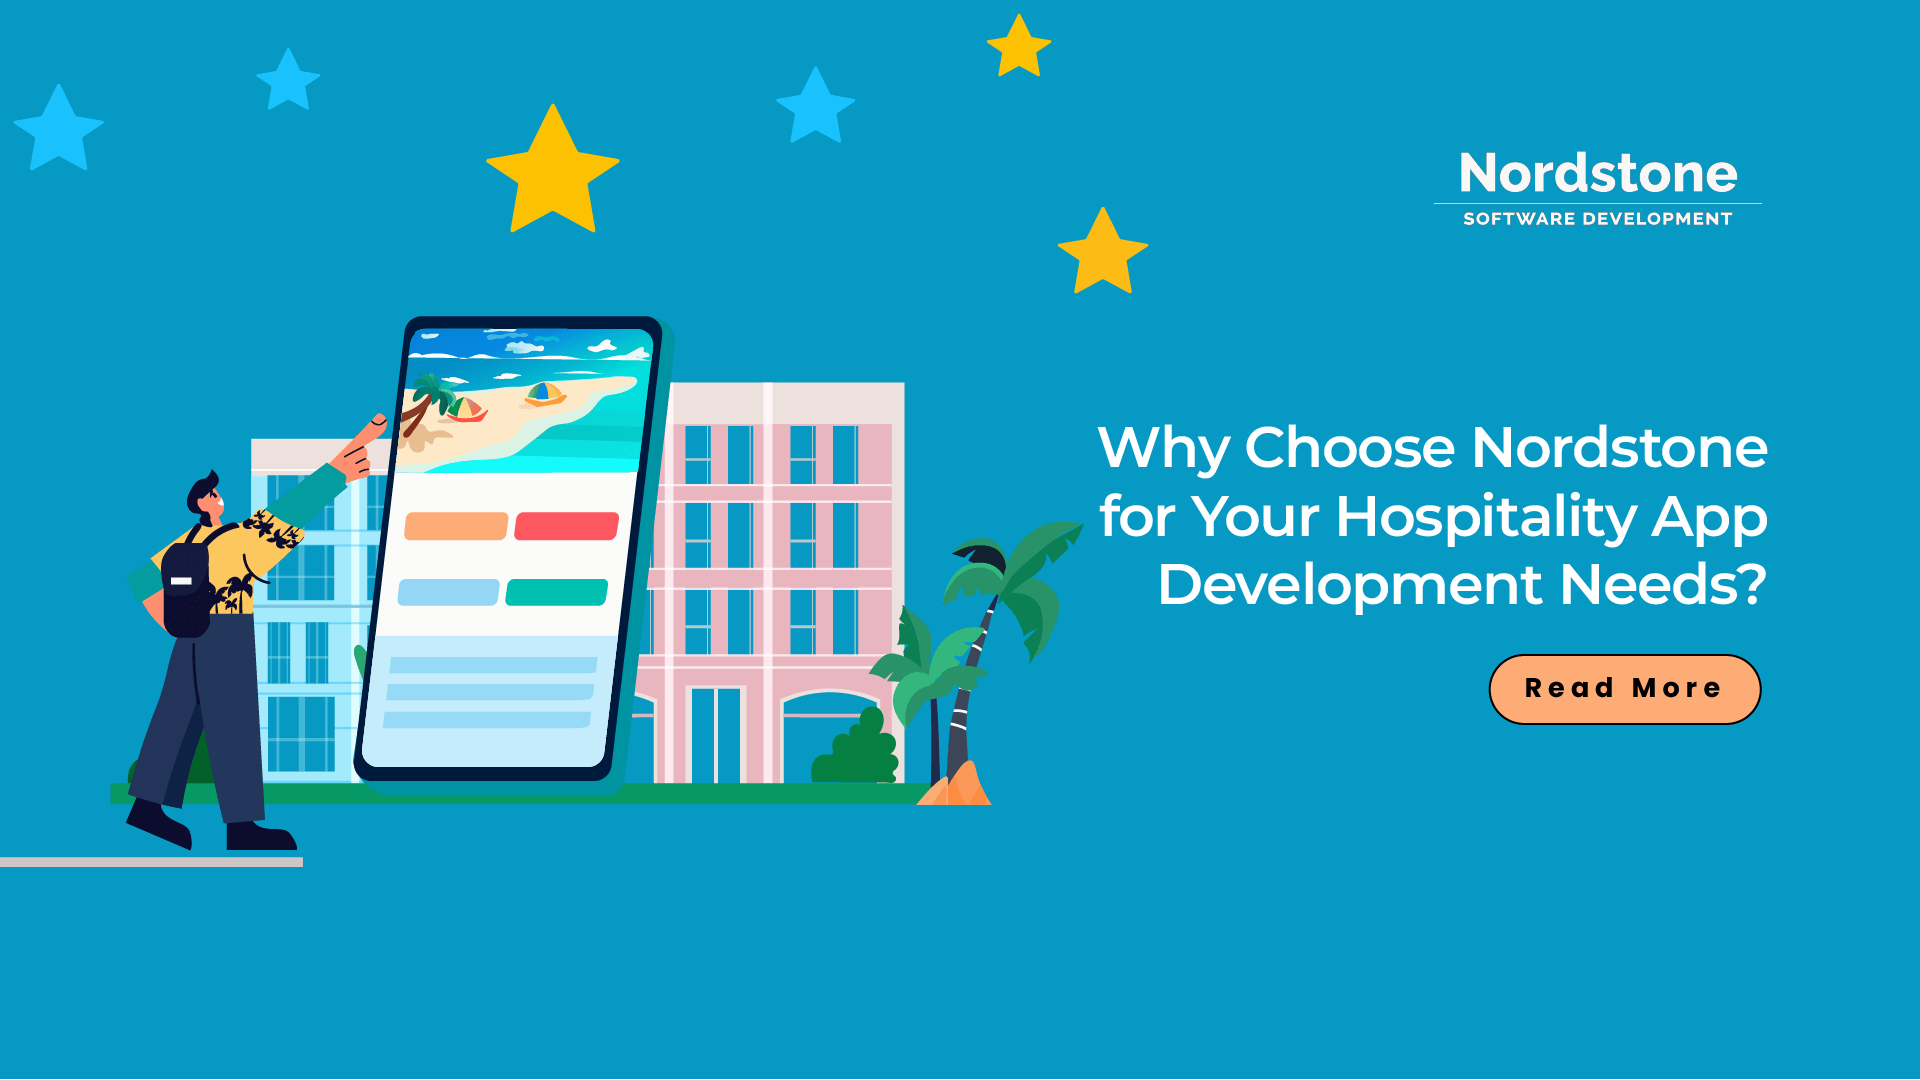 Why Choose Nordstone for Your Hospitality App Development Needs?